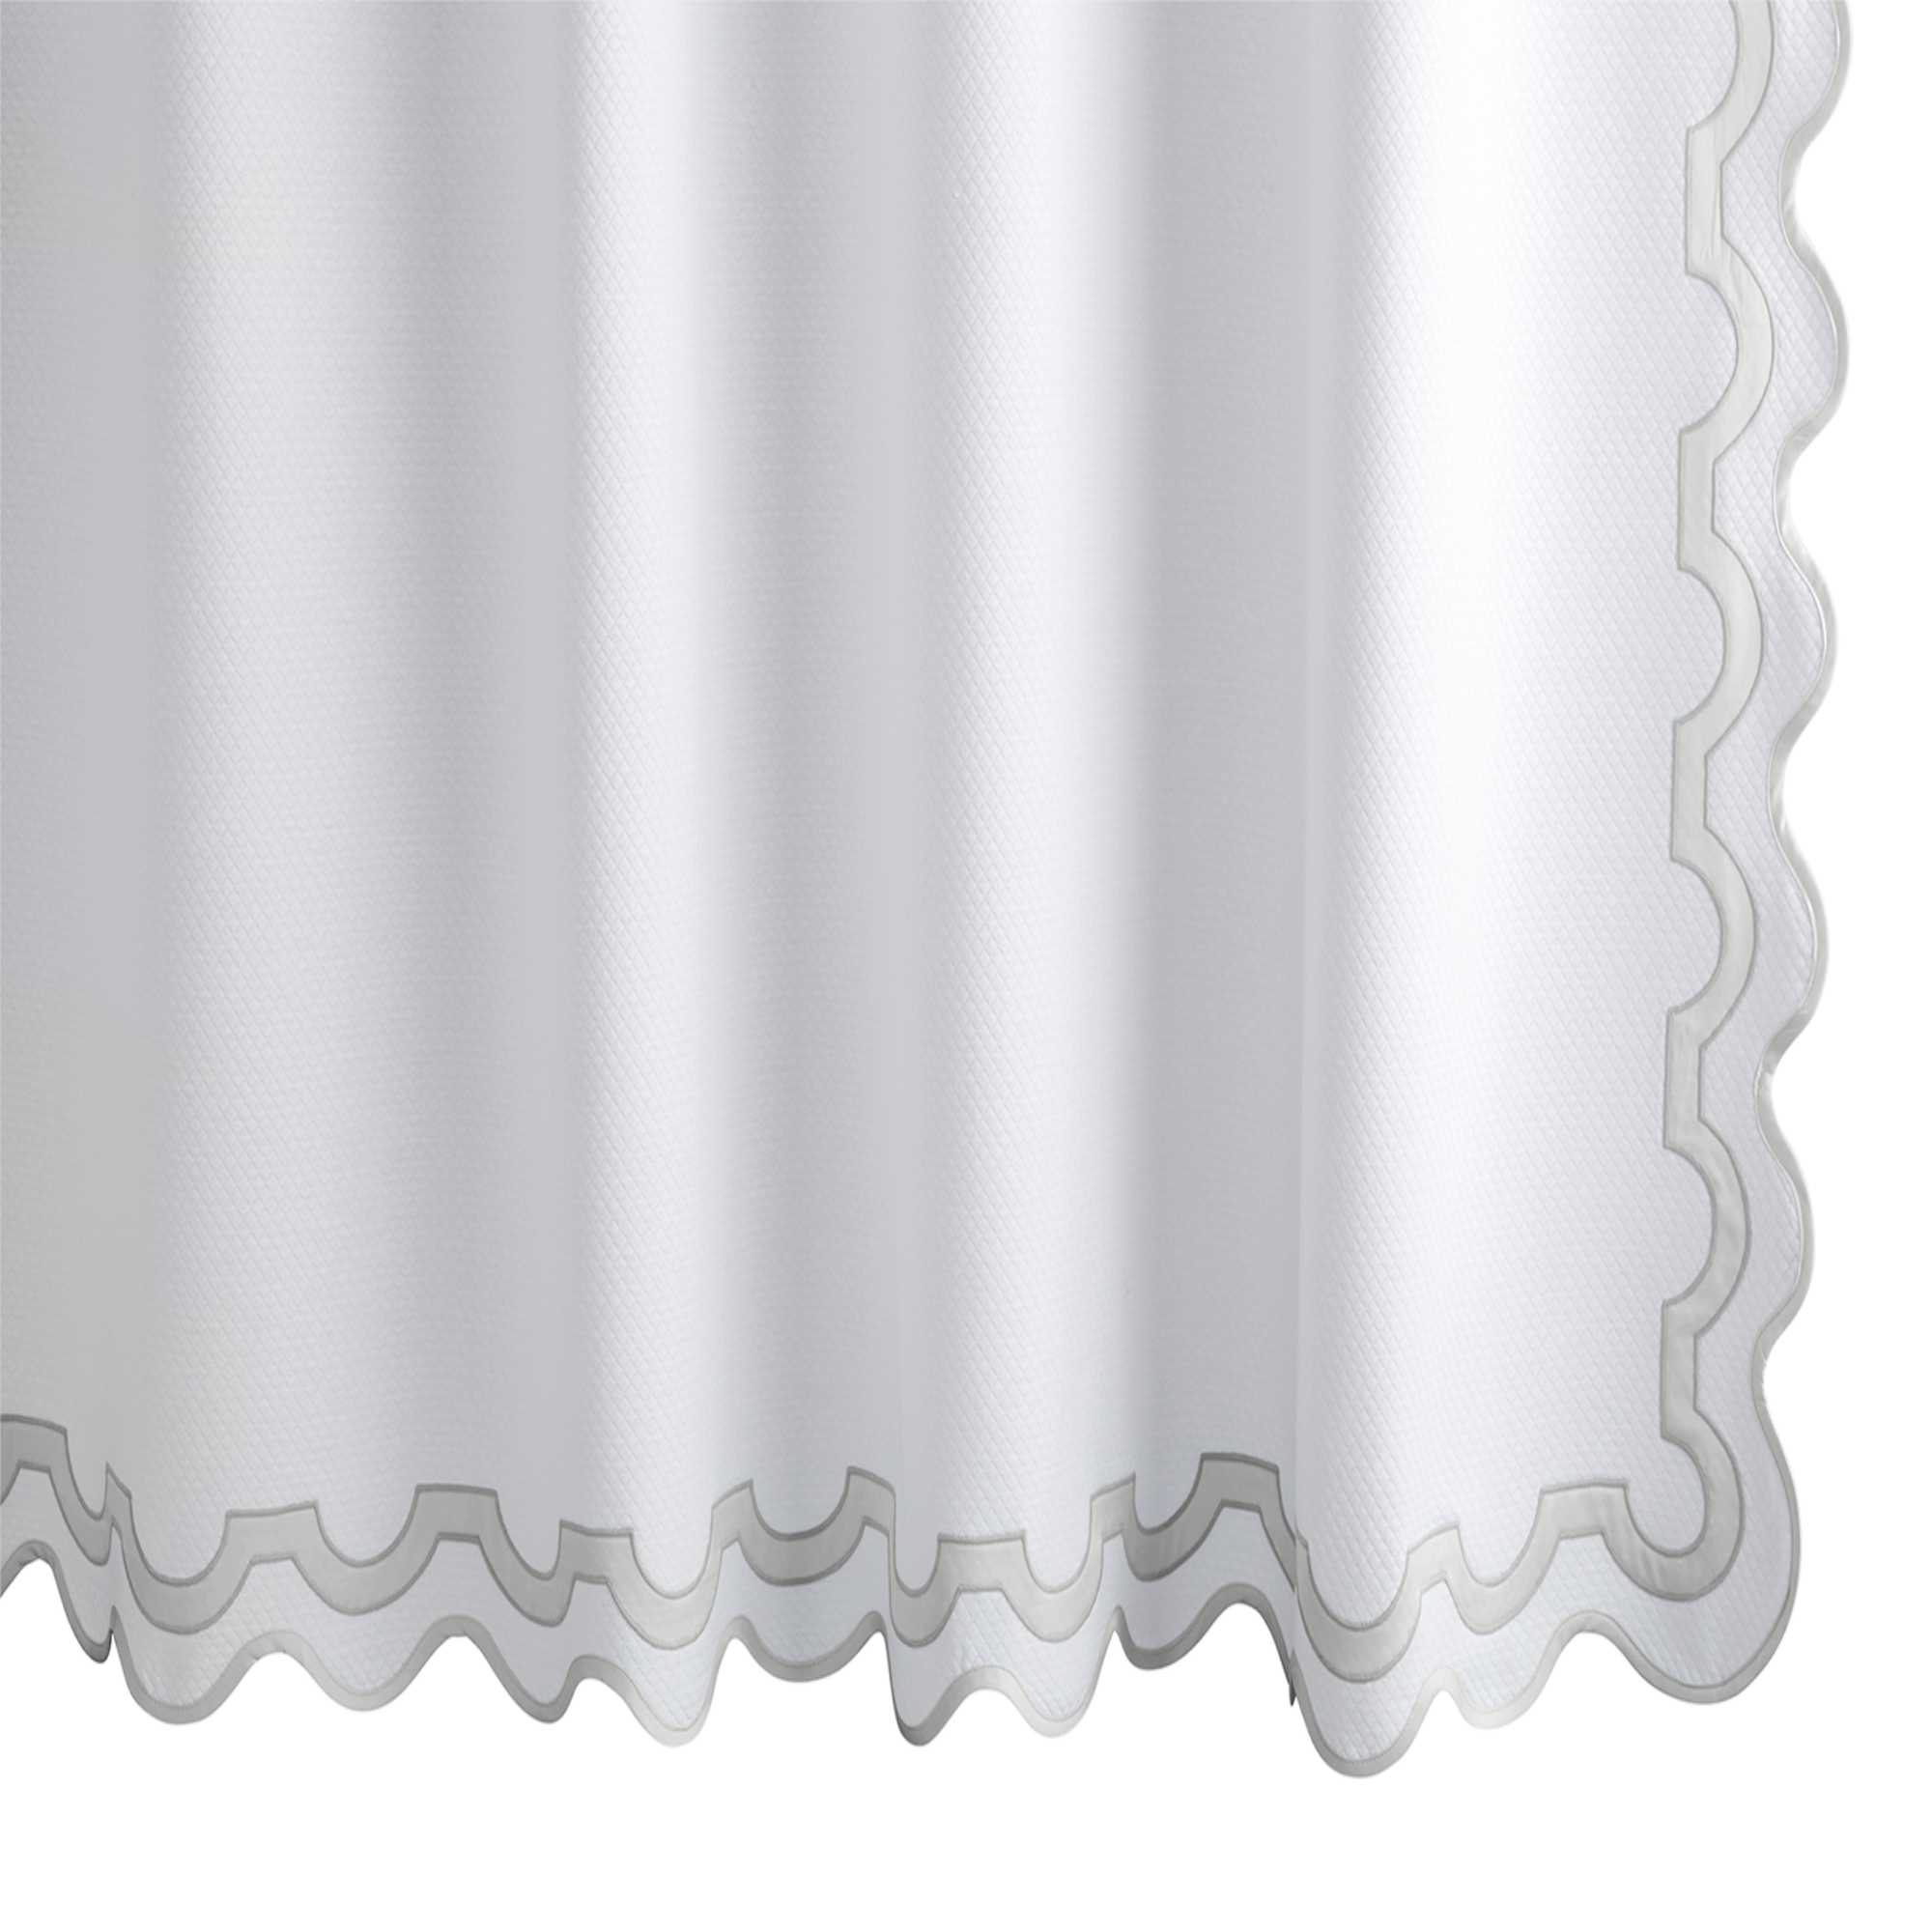 Hanging Edges of Matouk Mirasol Pique Shower Curtain in Silver Color